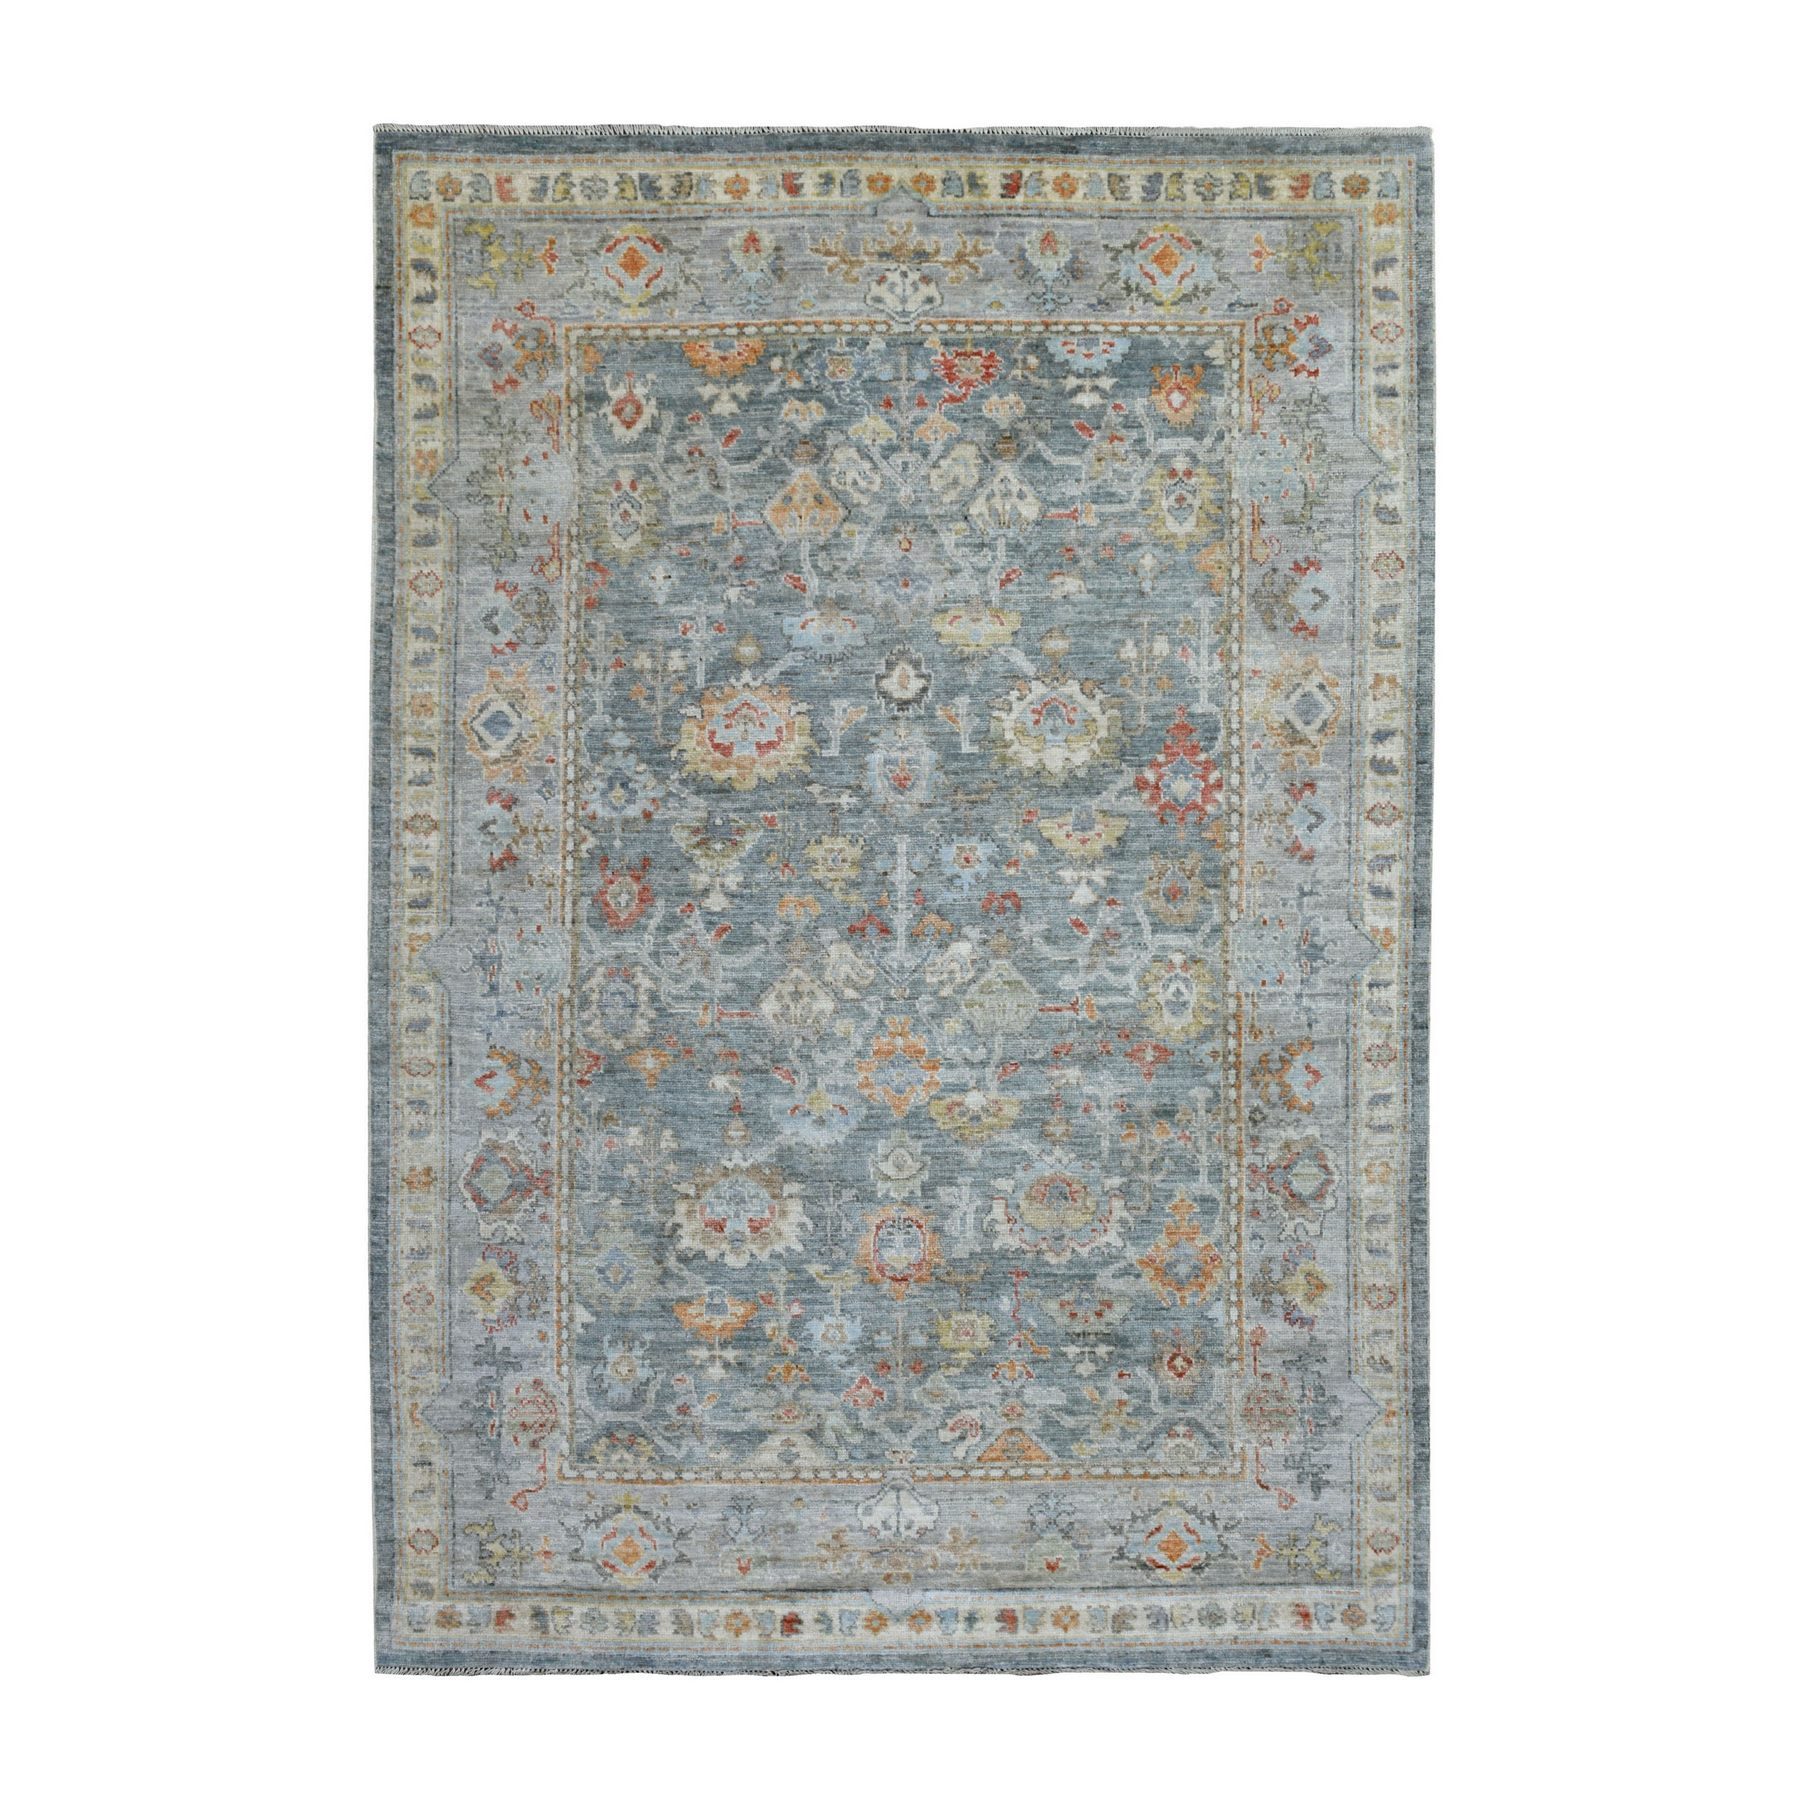 6'2"x9'1" Gray Angora Ushak with Blend of Bold Colors Extremely Durable Hand Woven Oriental Rug 